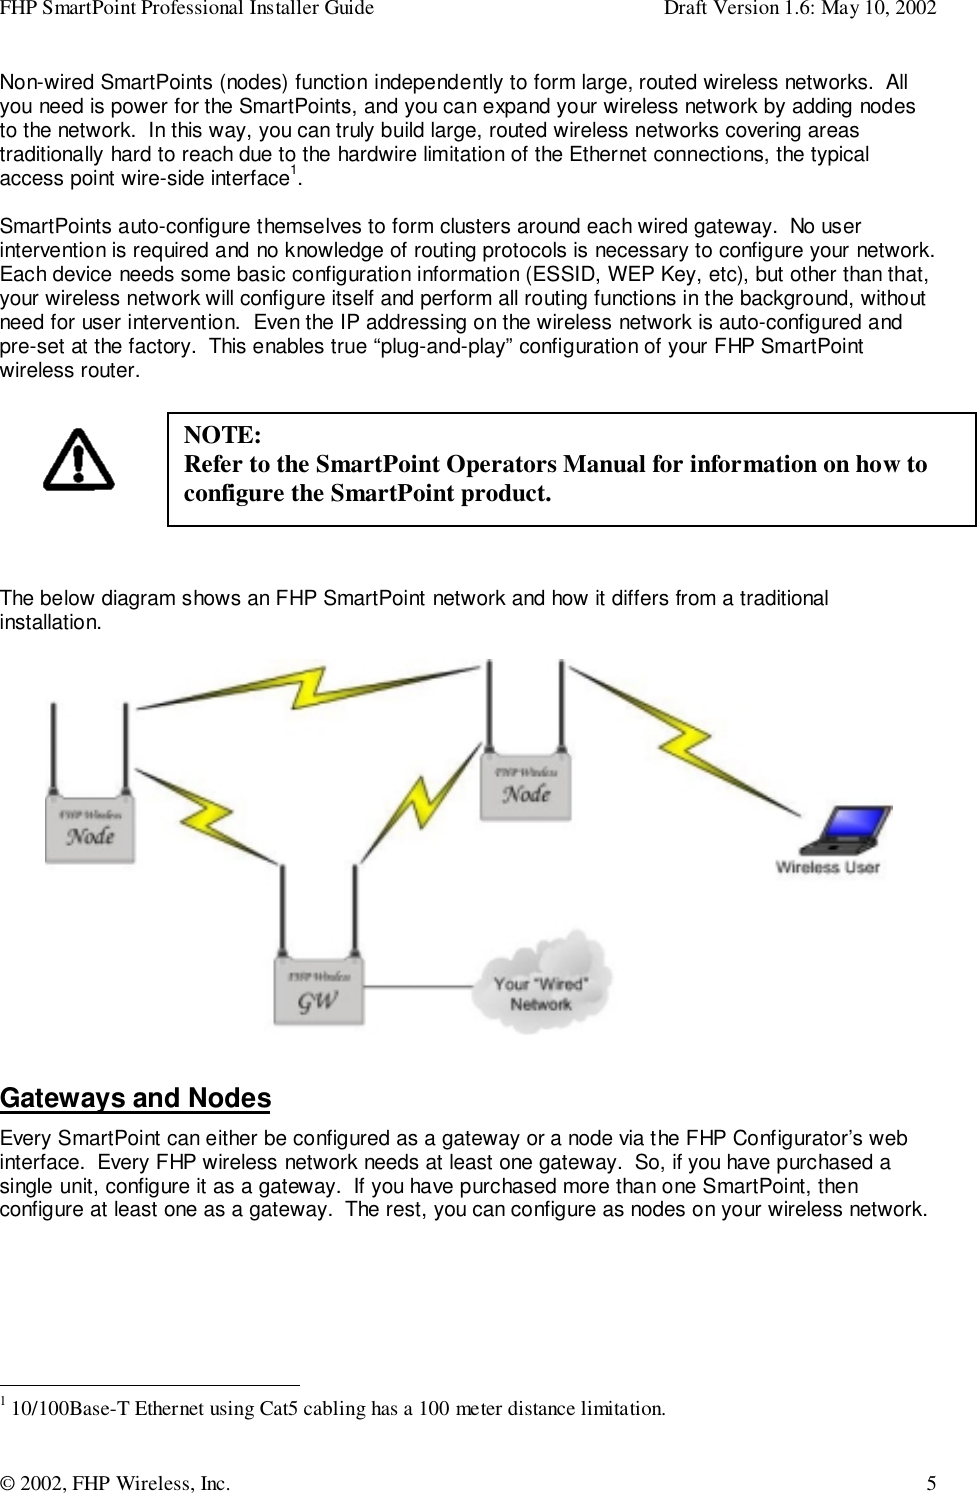 FHP SmartPoint Professional Installer Guide Draft Version 1.6: May 10, 2002© 2002, FHP Wireless, Inc. 5Non-wired SmartPoints (nodes) function independently to form large, routed wireless networks.  Allyou need is power for the SmartPoints, and you can expand your wireless network by adding nodesto the network.  In this way, you can truly build large, routed wireless networks covering areastraditionally hard to reach due to the hardwire limitation of the Ethernet connections, the typicalaccess point wire-side interface1.SmartPoints auto-configure themselves to form clusters around each wired gateway.  No userintervention is required and no knowledge of routing protocols is necessary to configure your network.Each device needs some basic configuration information (ESSID, WEP Key, etc), but other than that,your wireless network will configure itself and perform all routing functions in the background, withoutneed for user intervention.  Even the IP addressing on the wireless network is auto-configured andpre-set at the factory.  This enables true “plug-and-play” configuration of your FHP SmartPointwireless router.The below diagram shows an FHP SmartPoint network and how it differs from a traditionalinstallation.Gateways and NodesEvery SmartPoint can either be configured as a gateway or a node via the FHP Configurator’s webinterface.  Every FHP wireless network needs at least one gateway.  So, if you have purchased asingle unit, configure it as a gateway.  If you have purchased more than one SmartPoint, thenconfigure at least one as a gateway.  The rest, you can configure as nodes on your wireless network.                                                1 10/100Base-T Ethernet using Cat5 cabling has a 100 meter distance limitation.NOTE:Refer to the SmartPoint Operators Manual for information on how toconfigure the SmartPoint product.